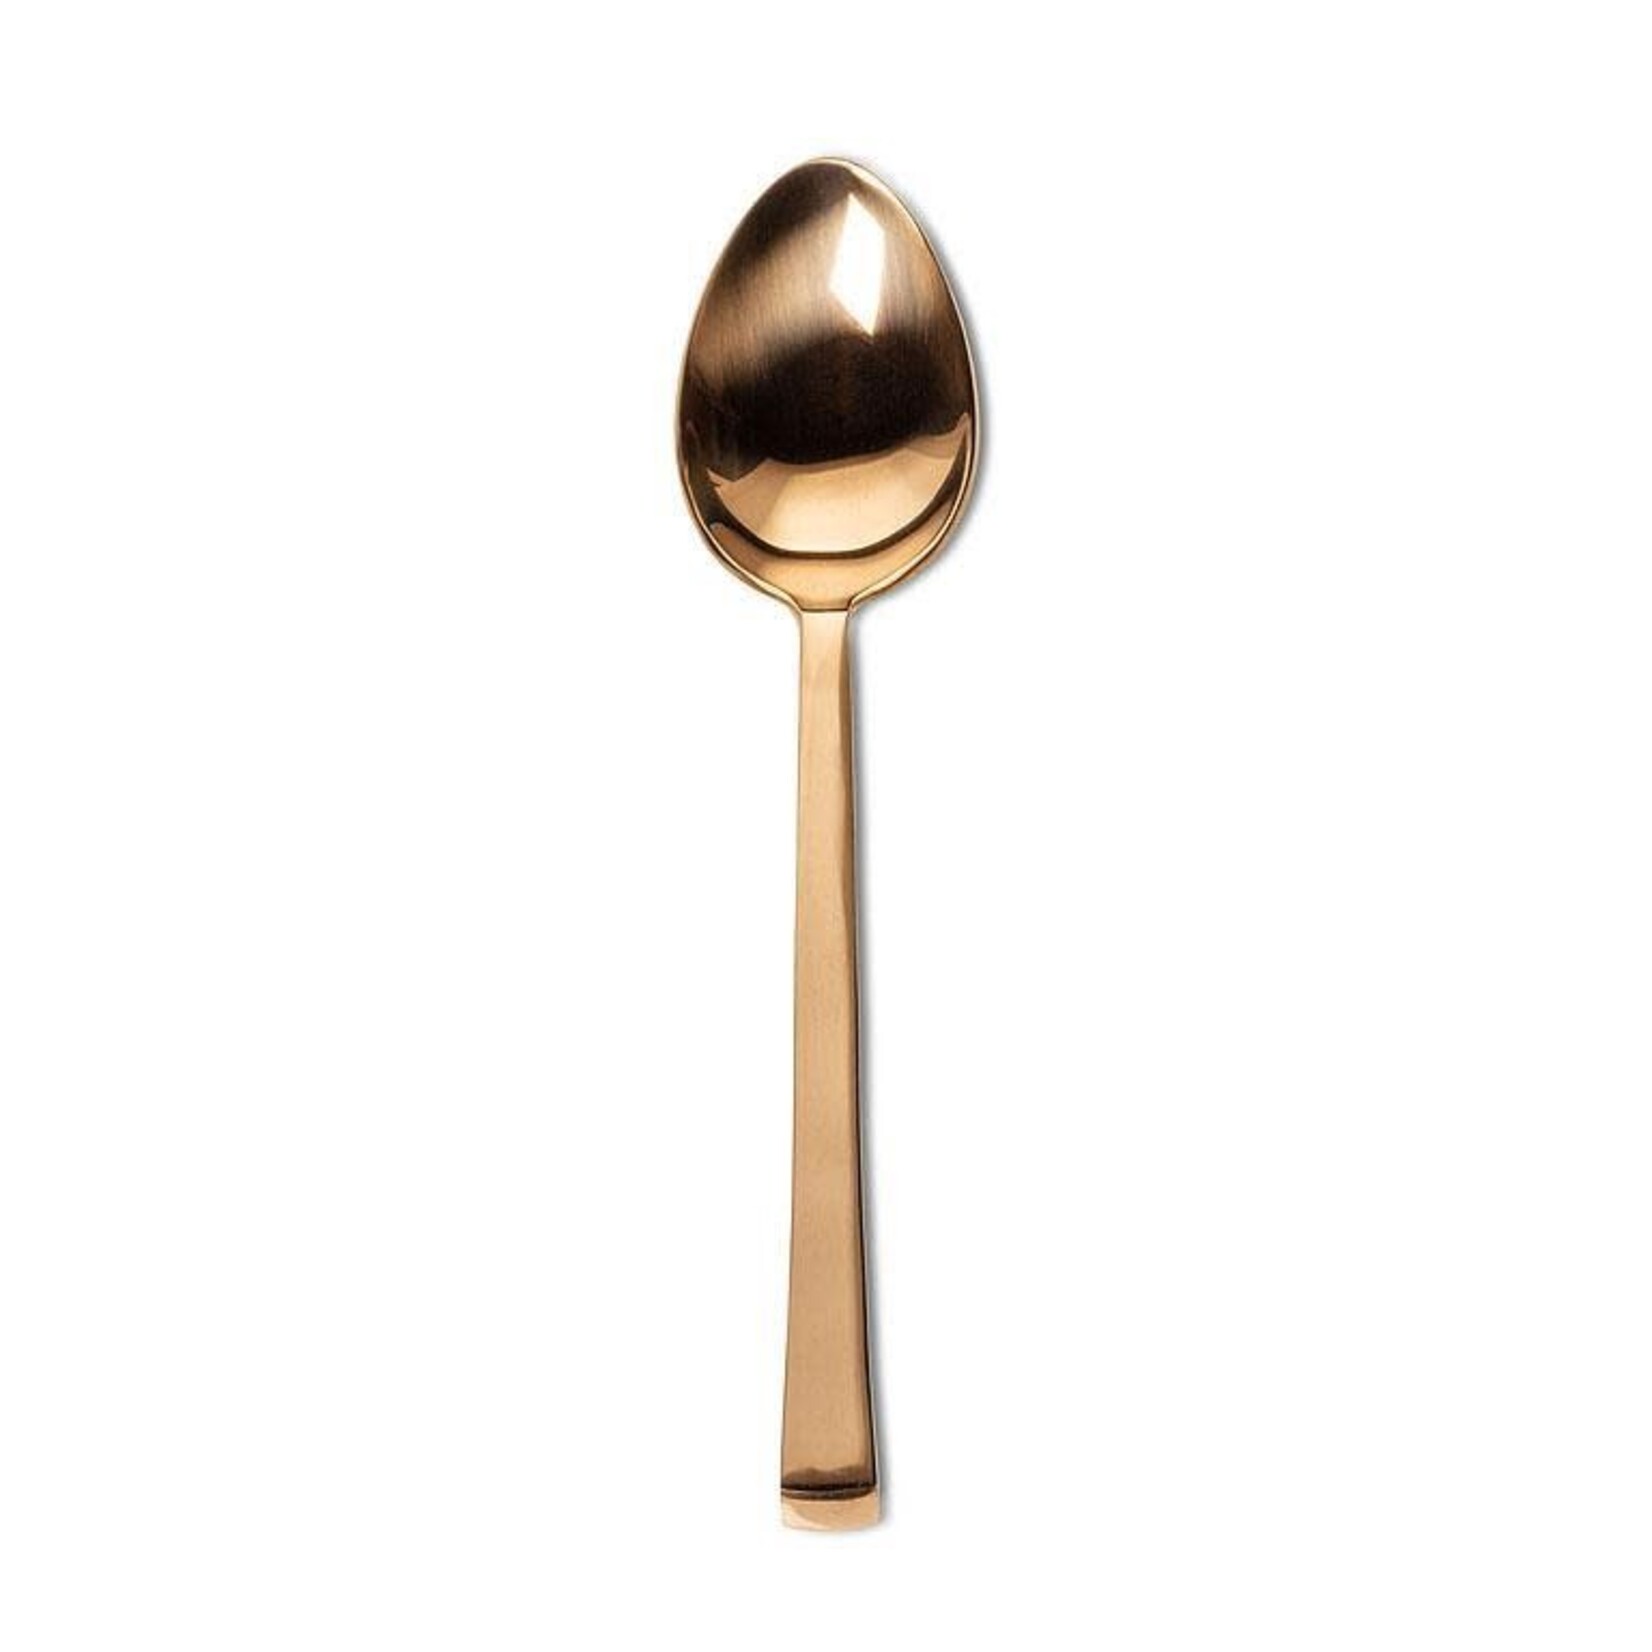 Copper Square Handle Spoon - Large